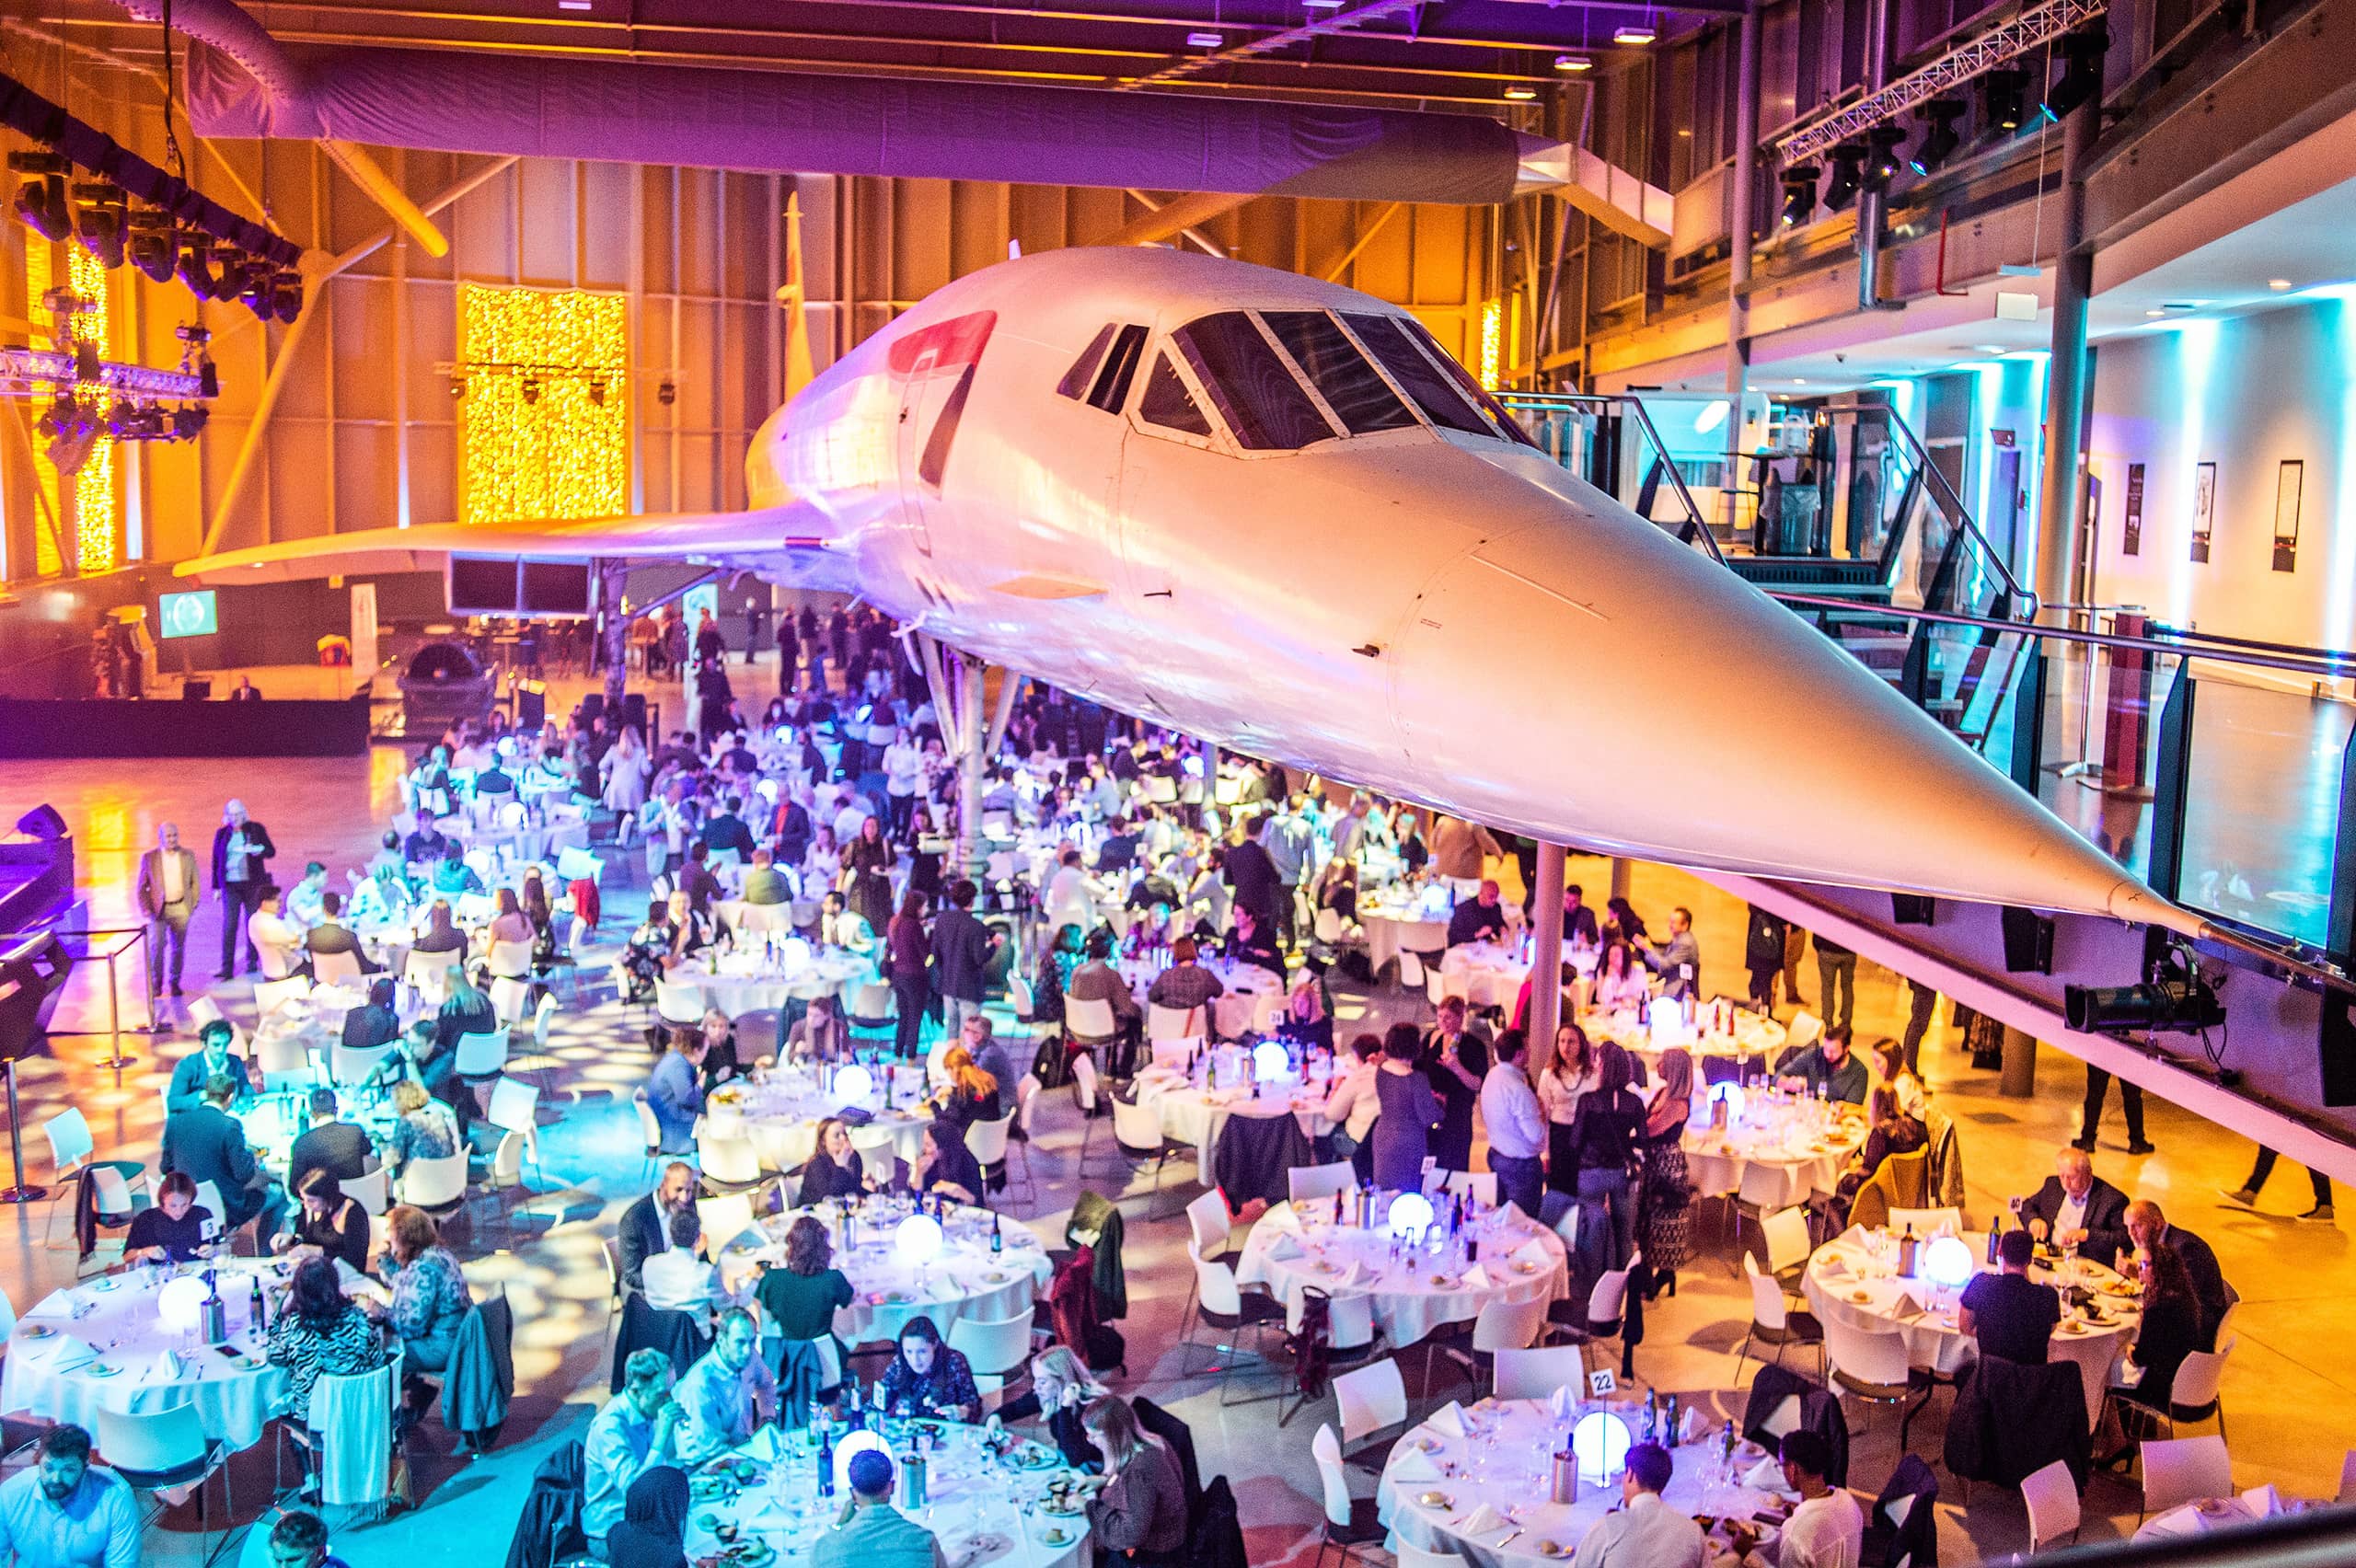 Concorde at Aerospace Bristol with conference attendees sat underneath